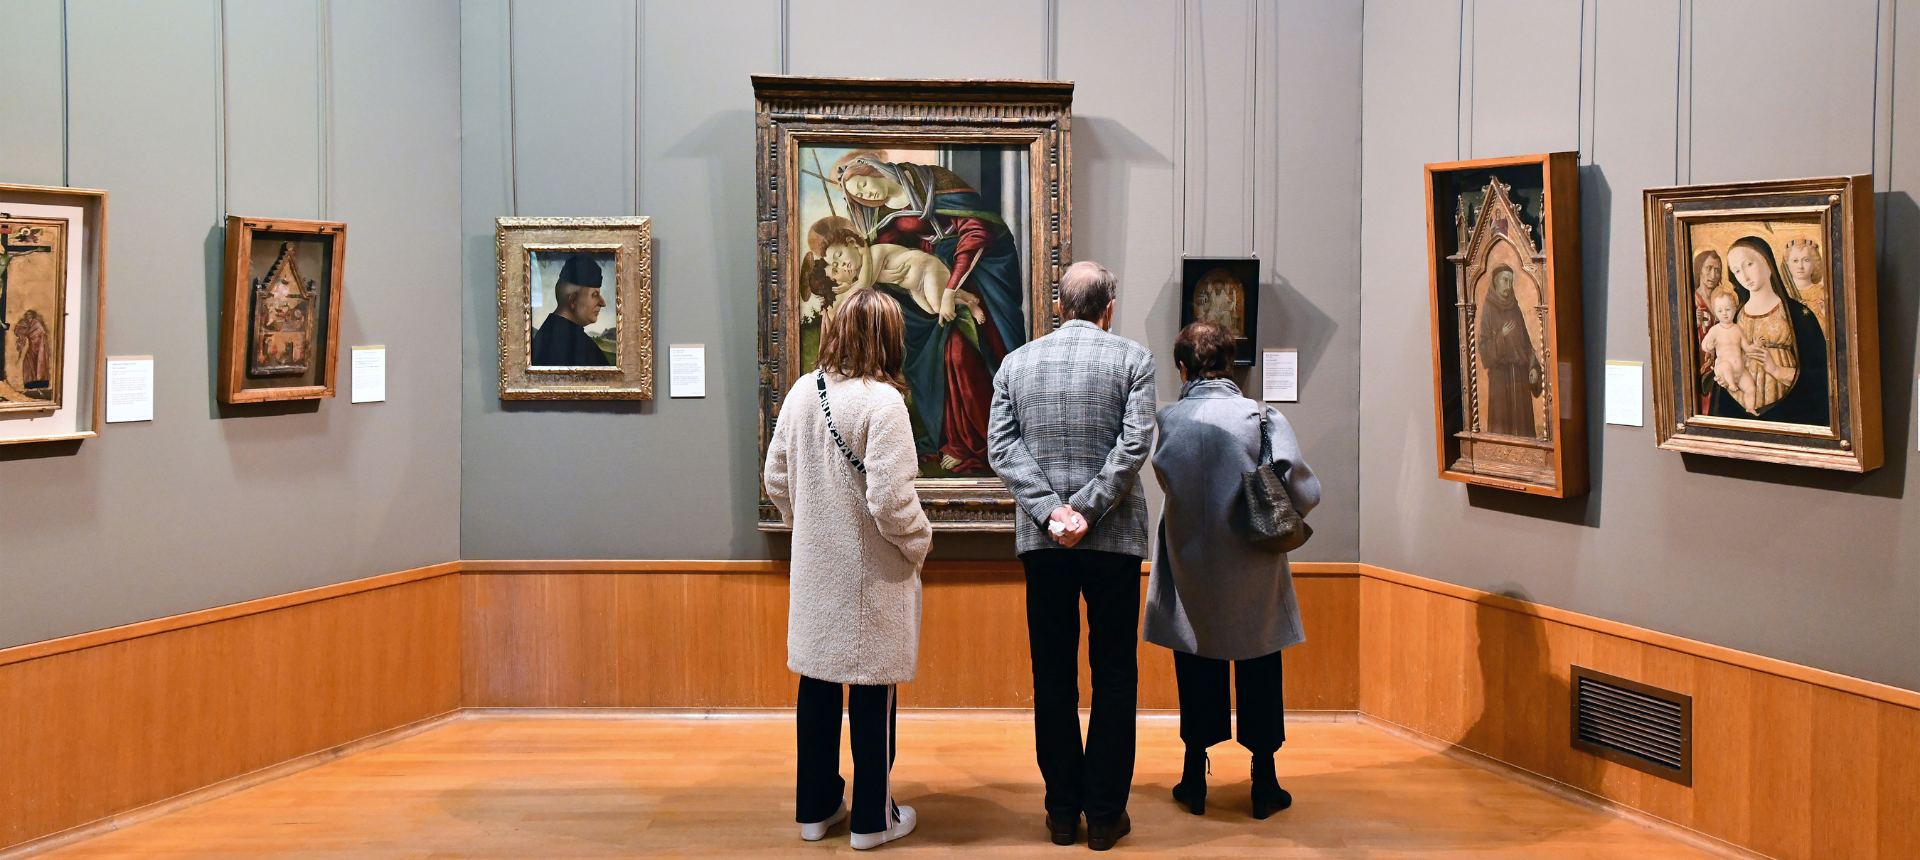 Three people shown from behind looking intently at an artwork in a gallery